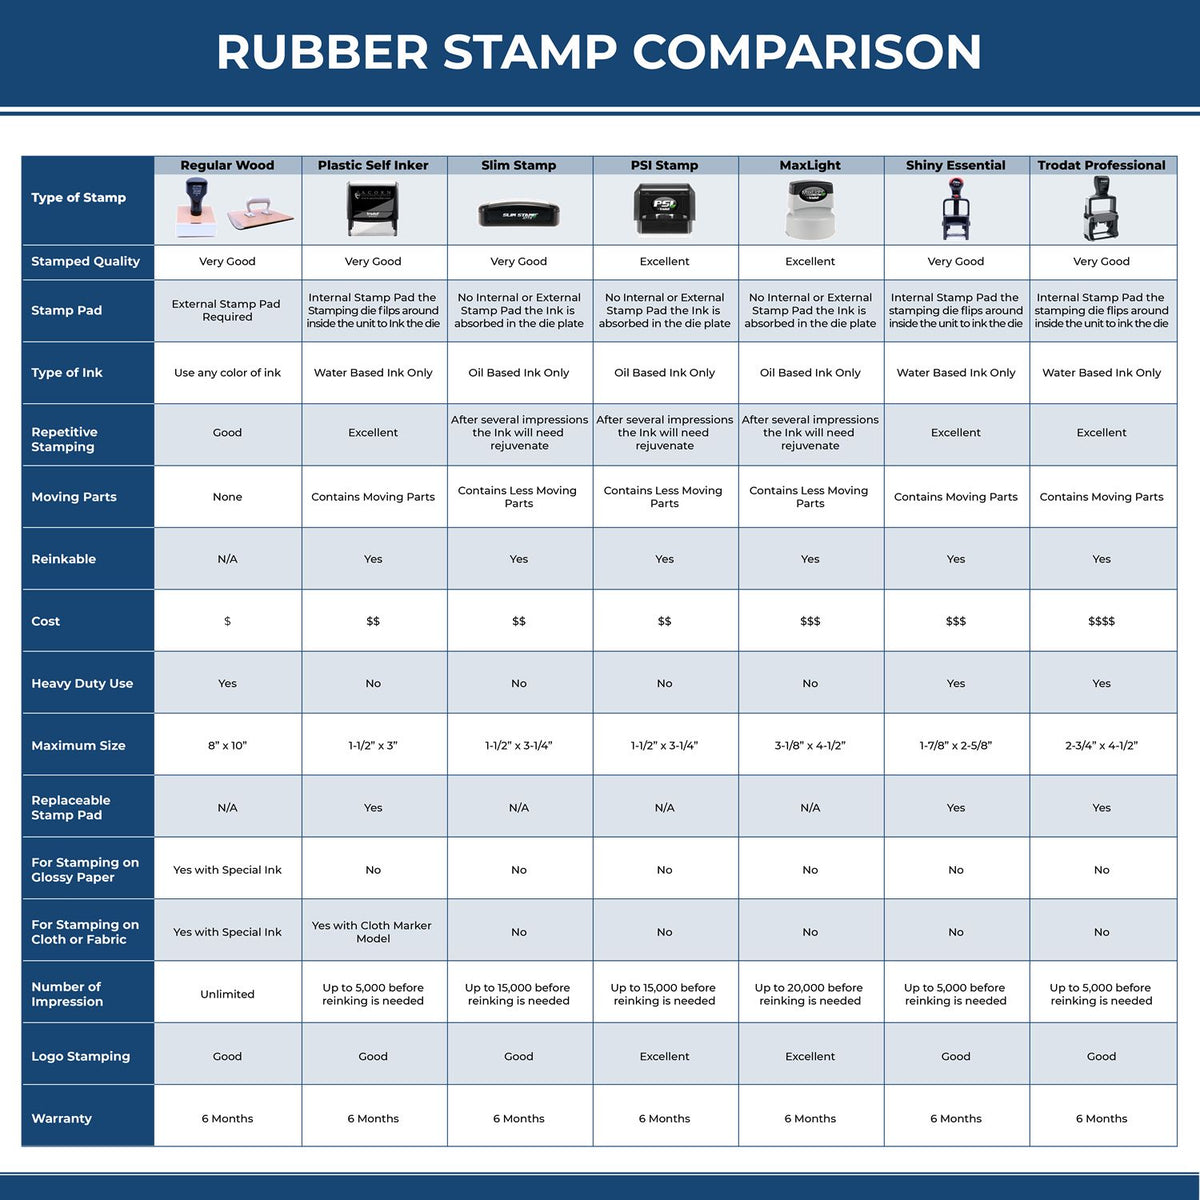 Large Patients Signature on File Rubber Stamp 4910R Rubber Stamp Comparison